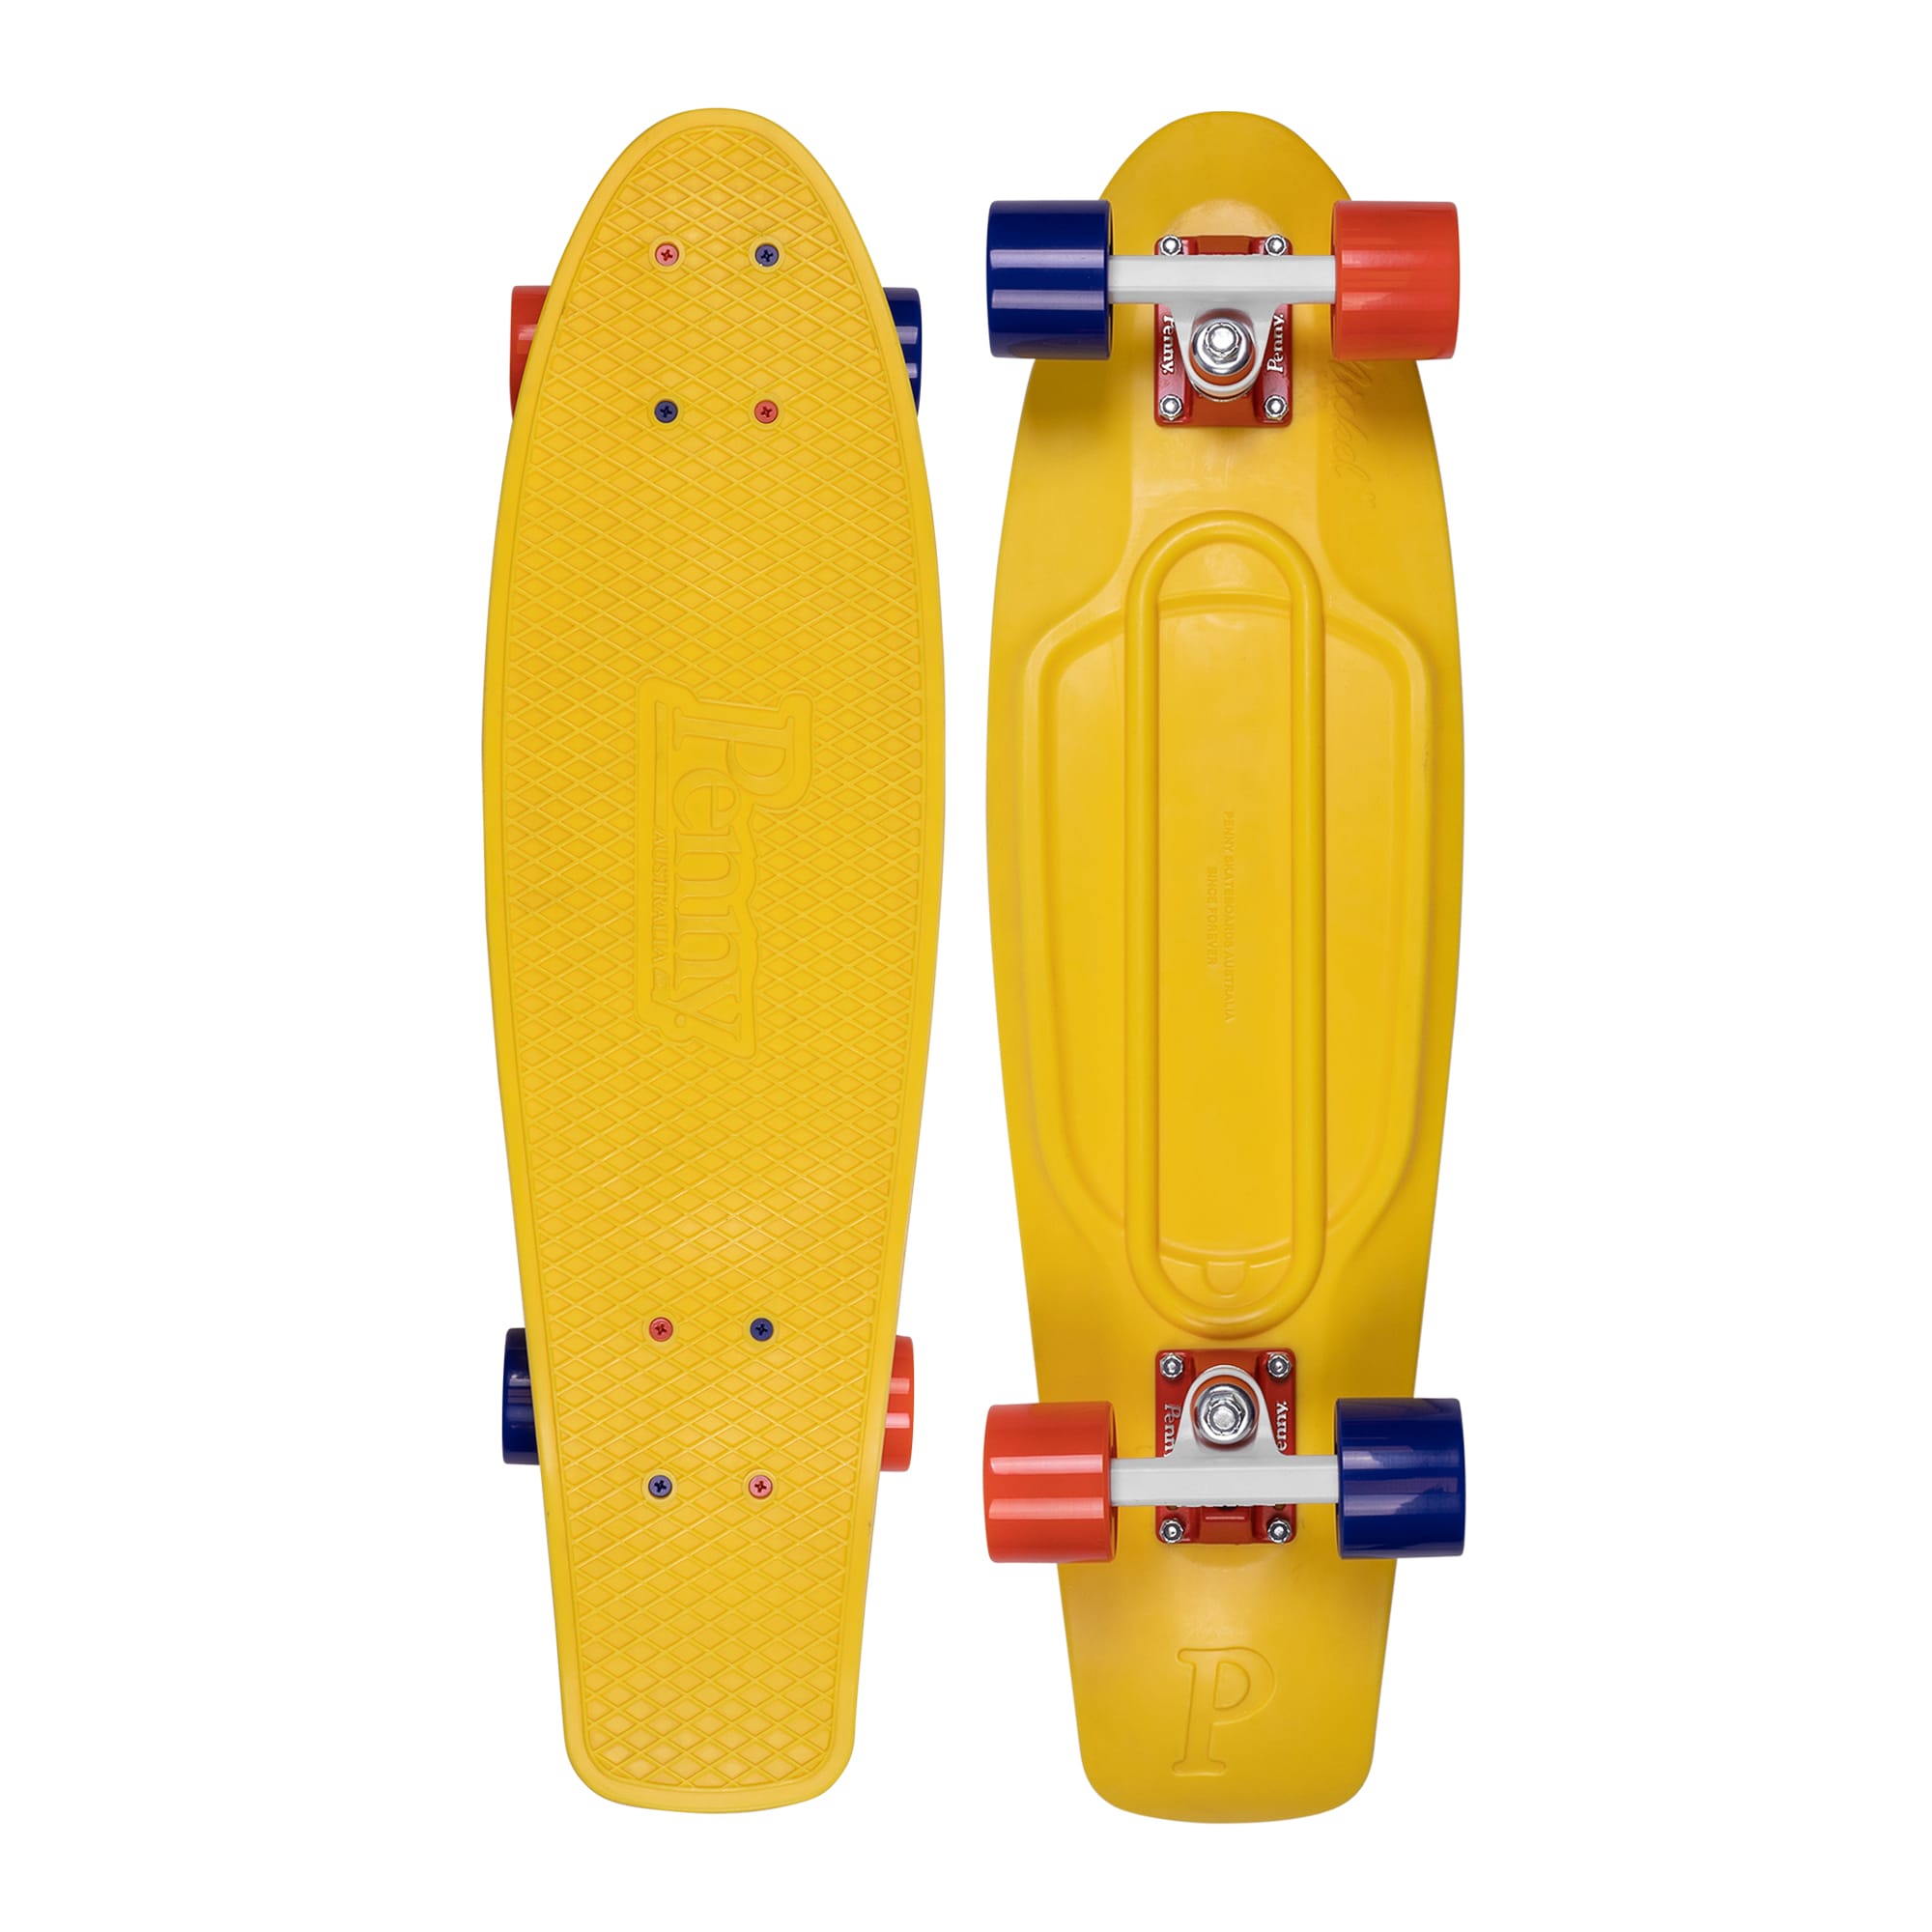 The Champ 27" Complete Skateboard by Penny Skateboards | Board